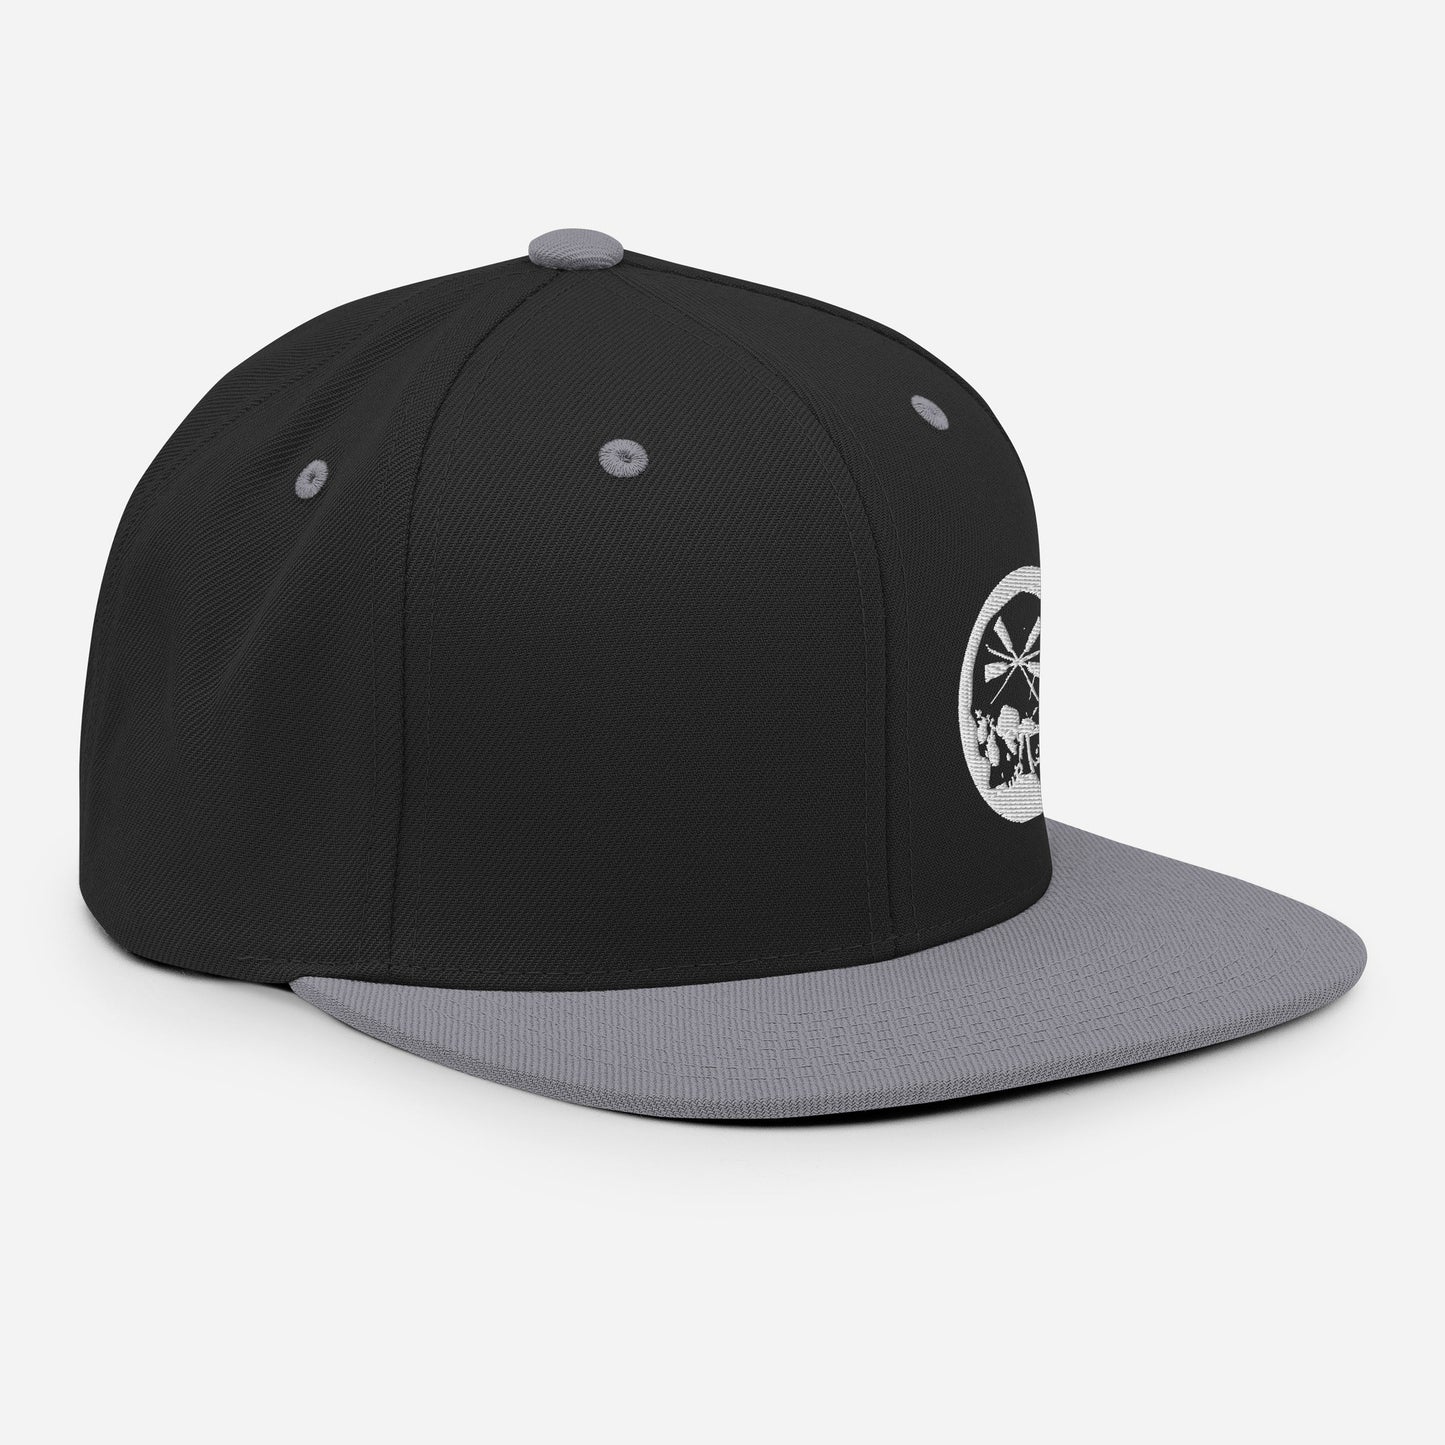 Casquette Snapback Brodé The Needles Factory logo Free Shipping